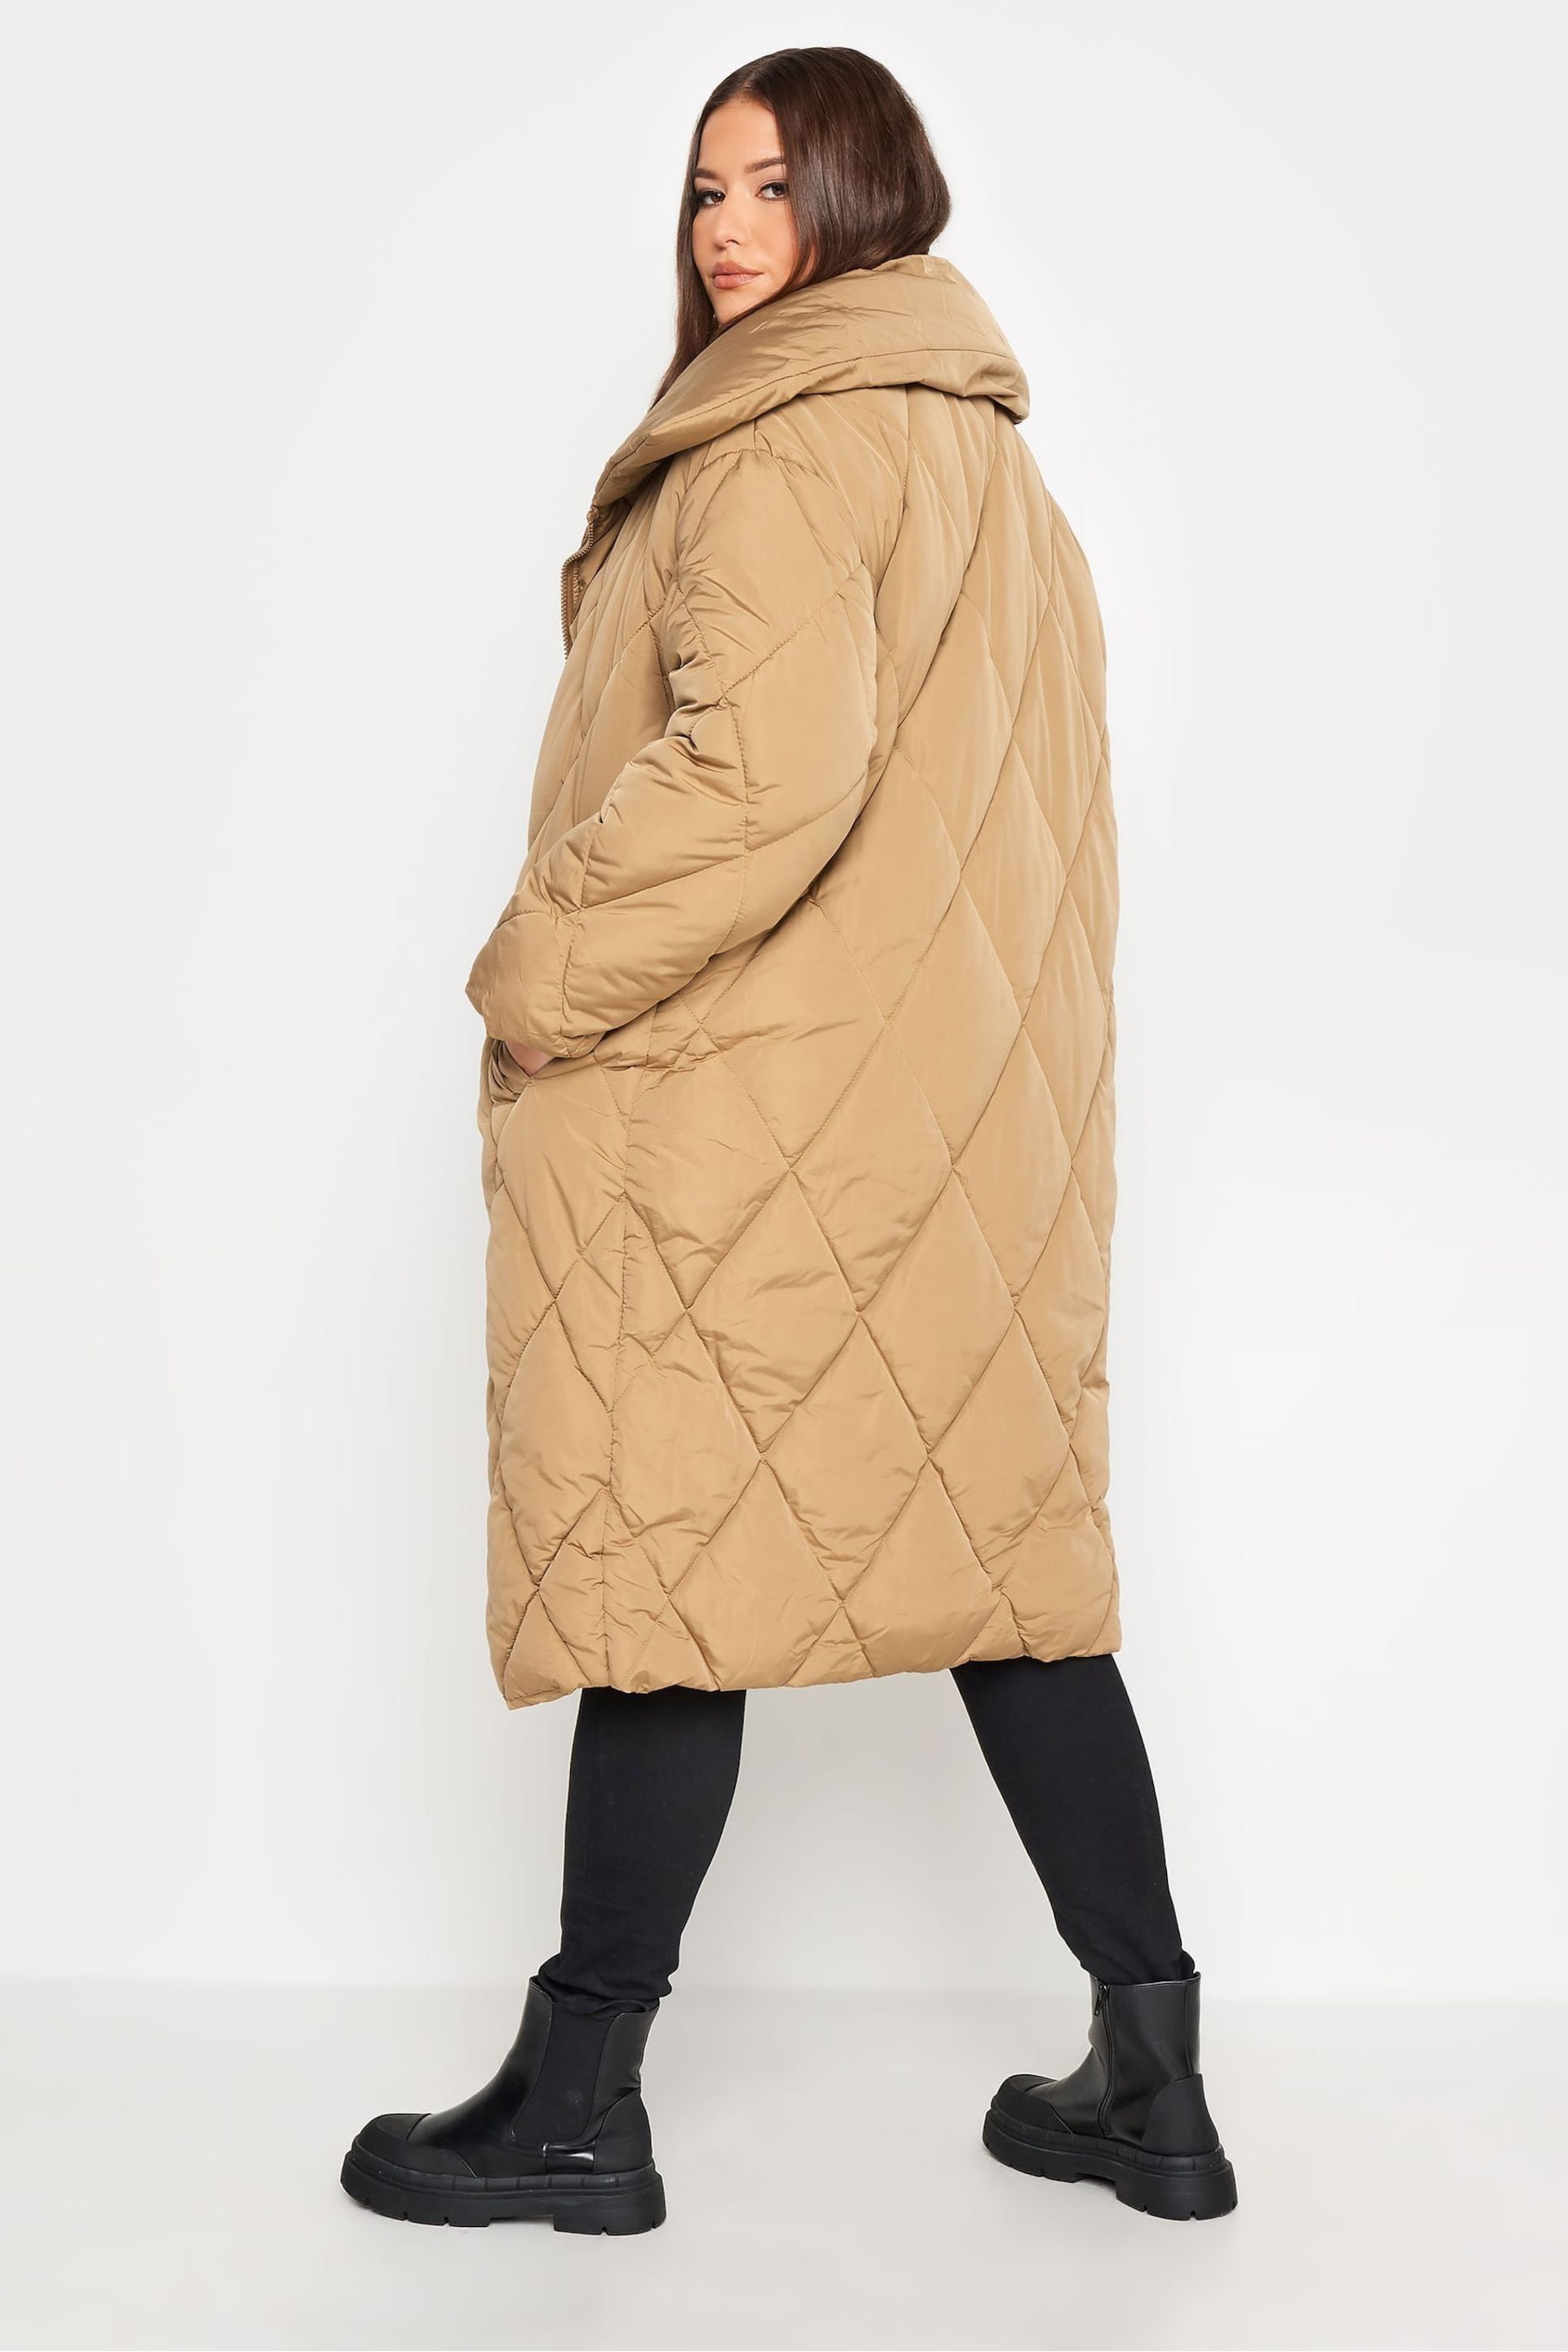 Yours Curve Cream Diamond Quilted Puffer Coat - Image 2 of 4